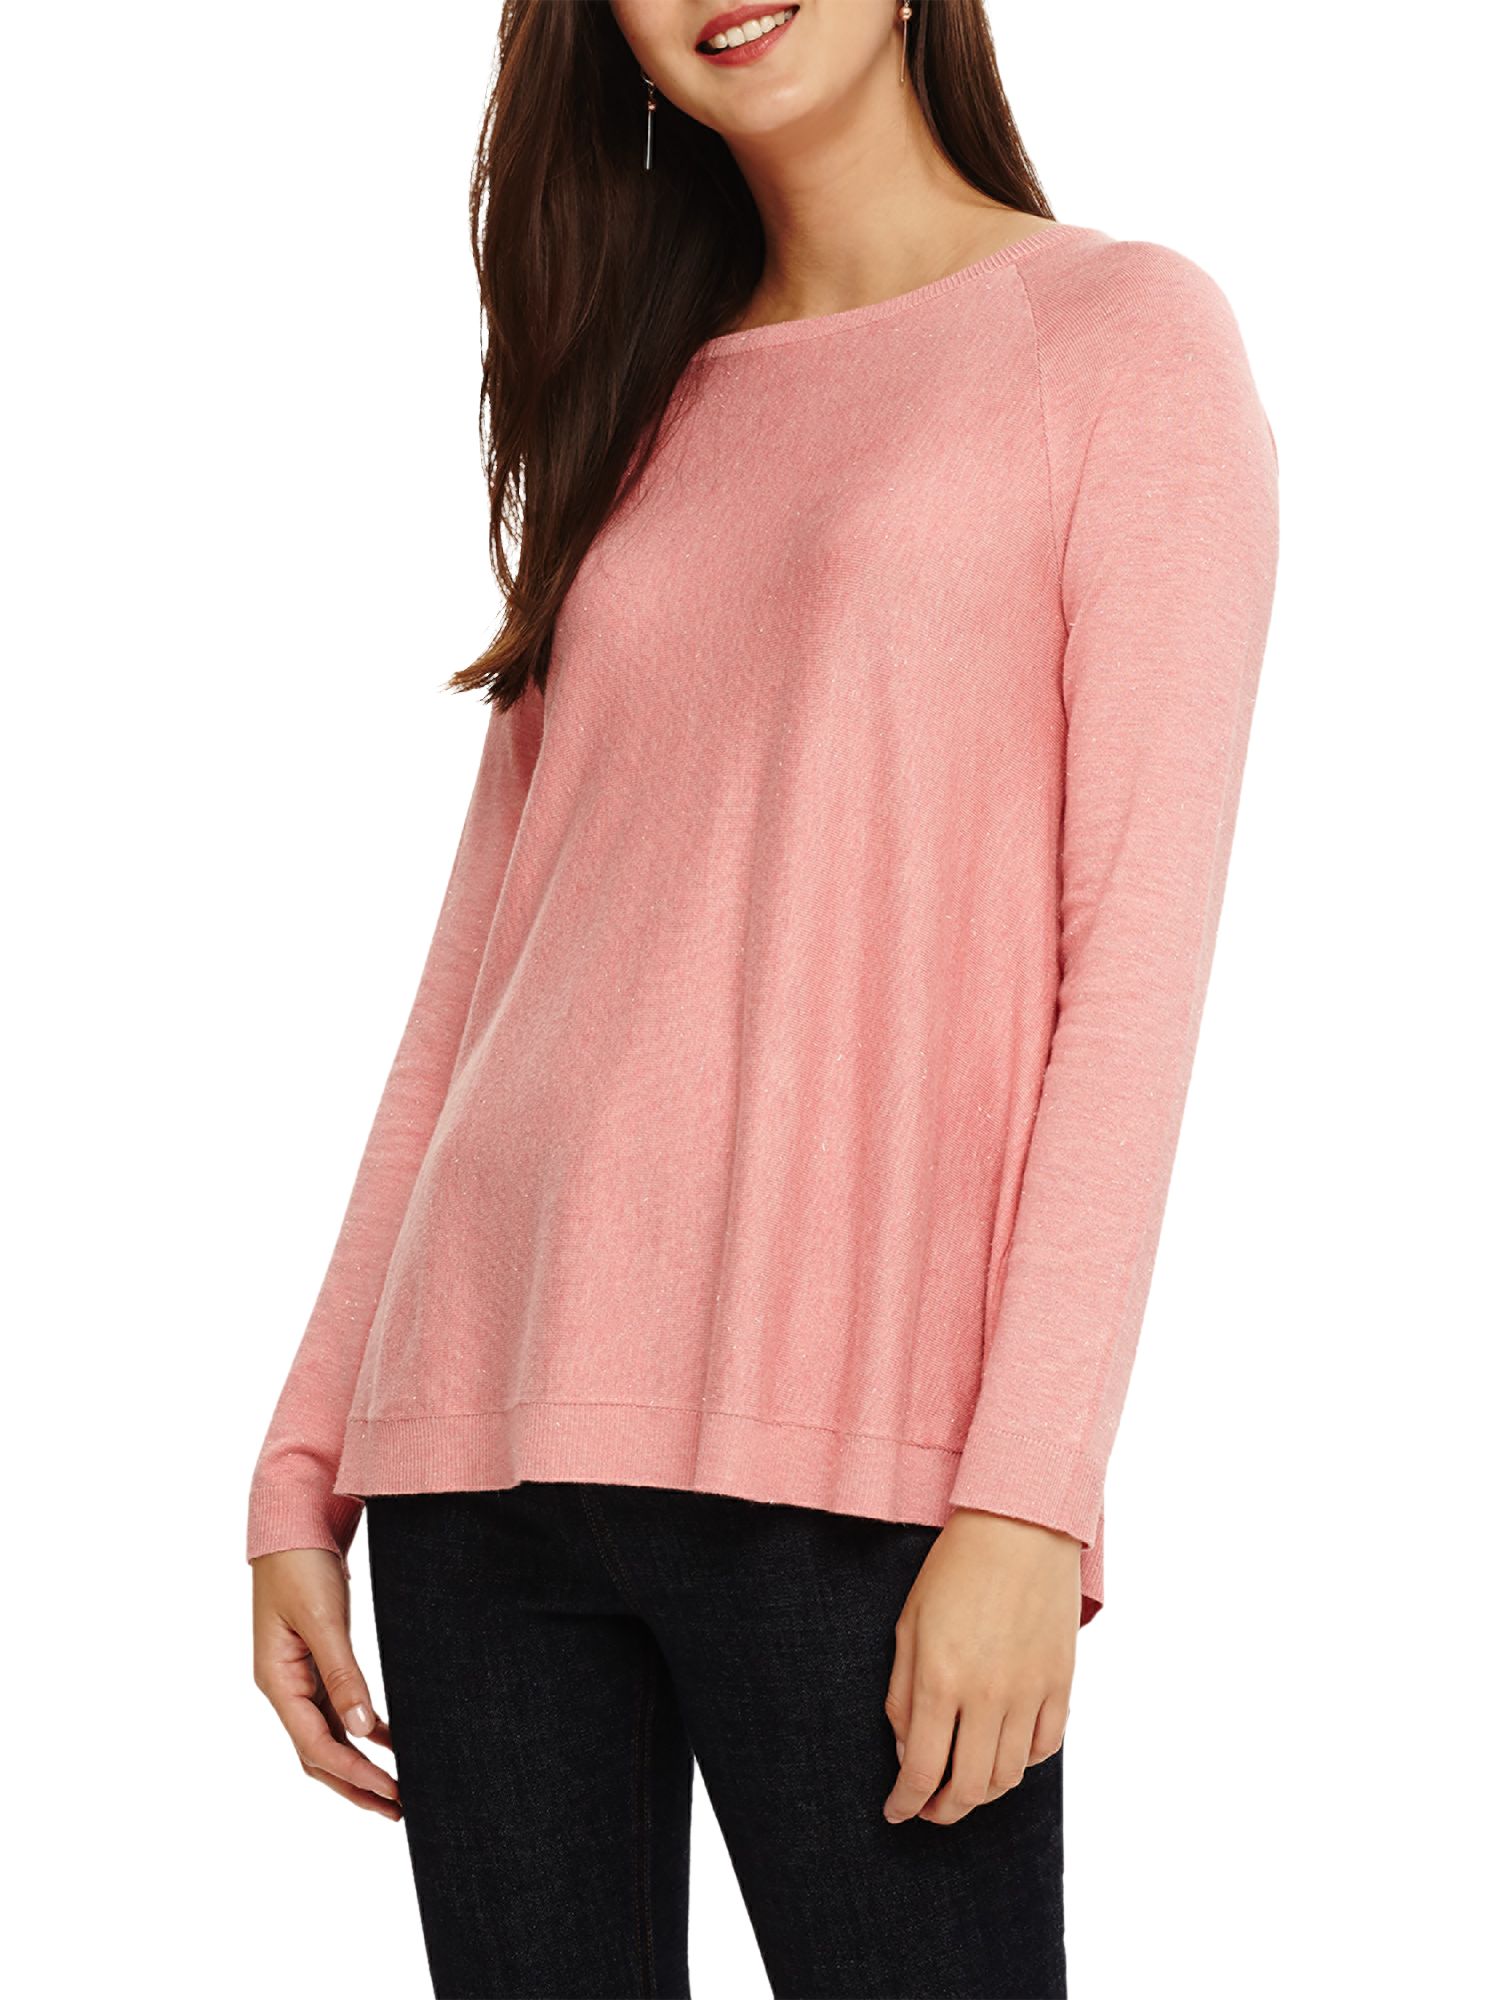 Phase Eight Terza Zip Back Knit Top, Candy